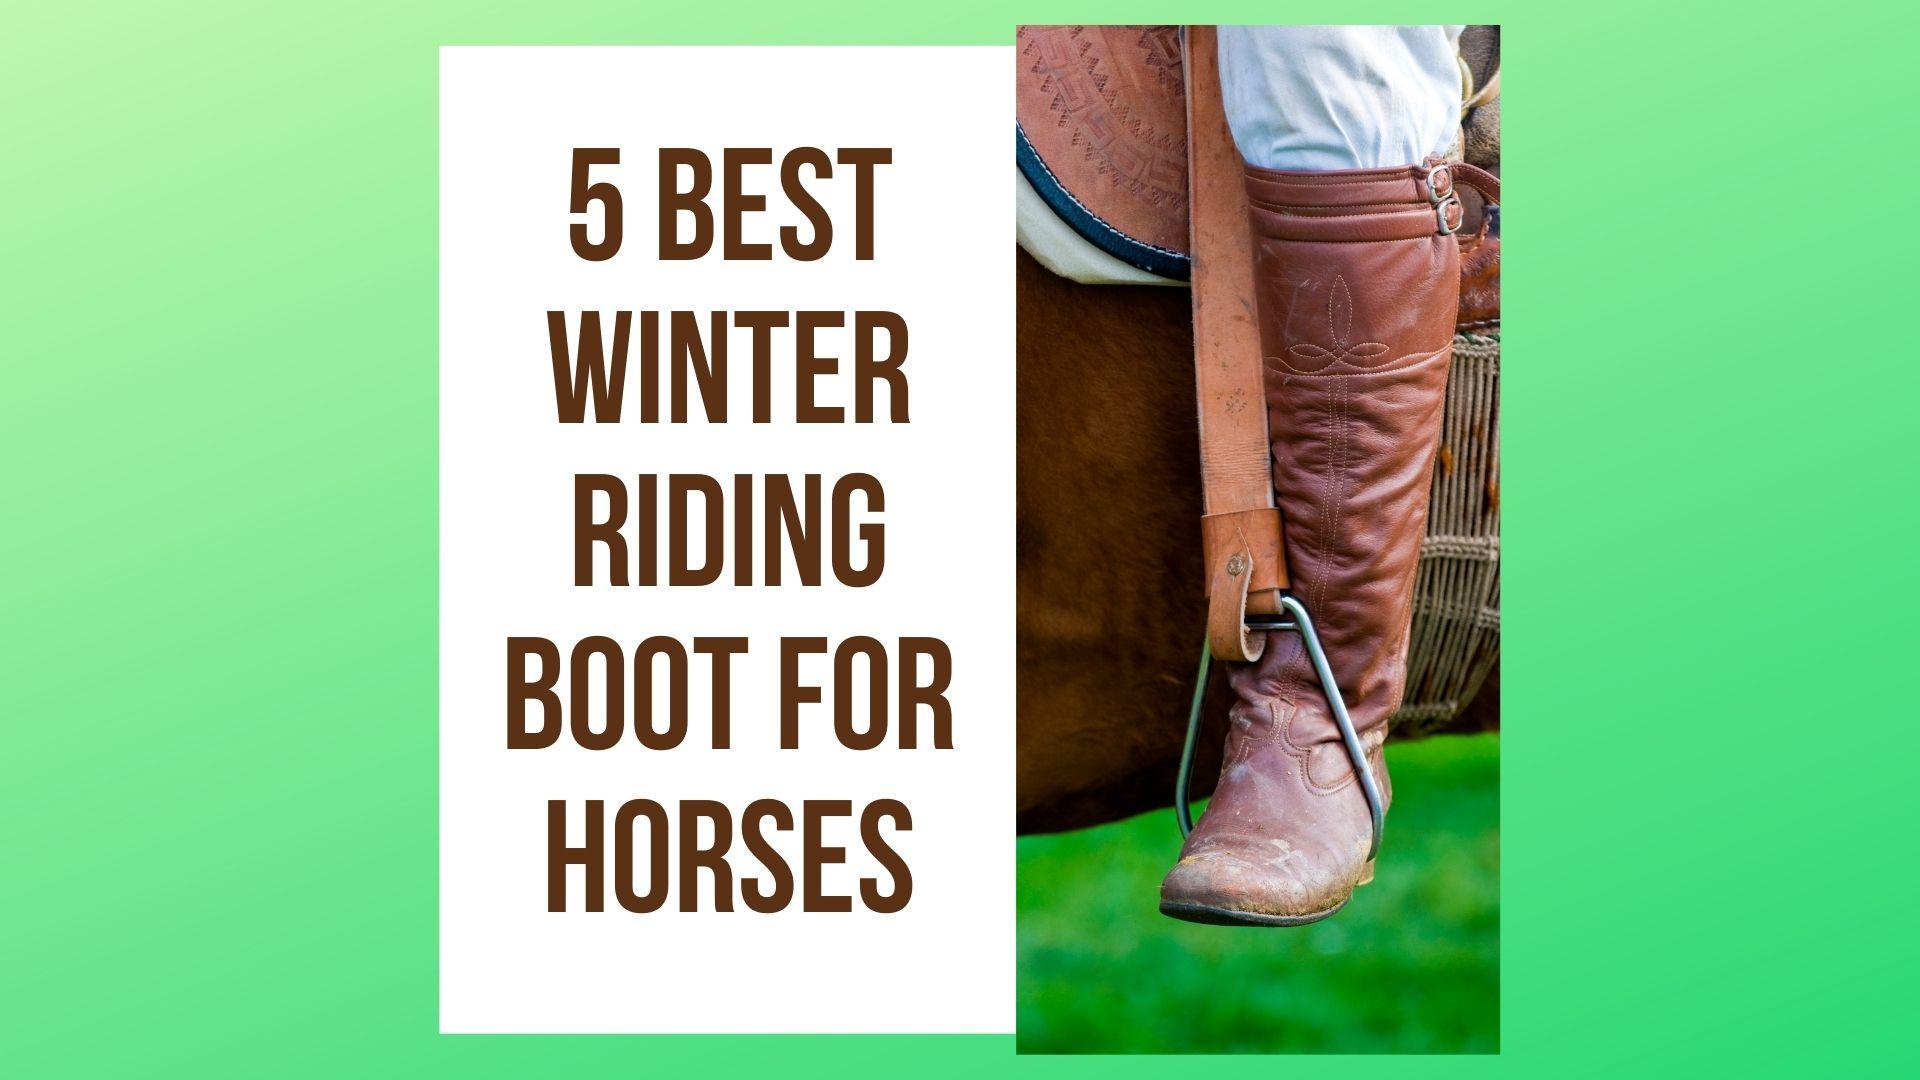 5 Best Winter Riding Boot for Horses